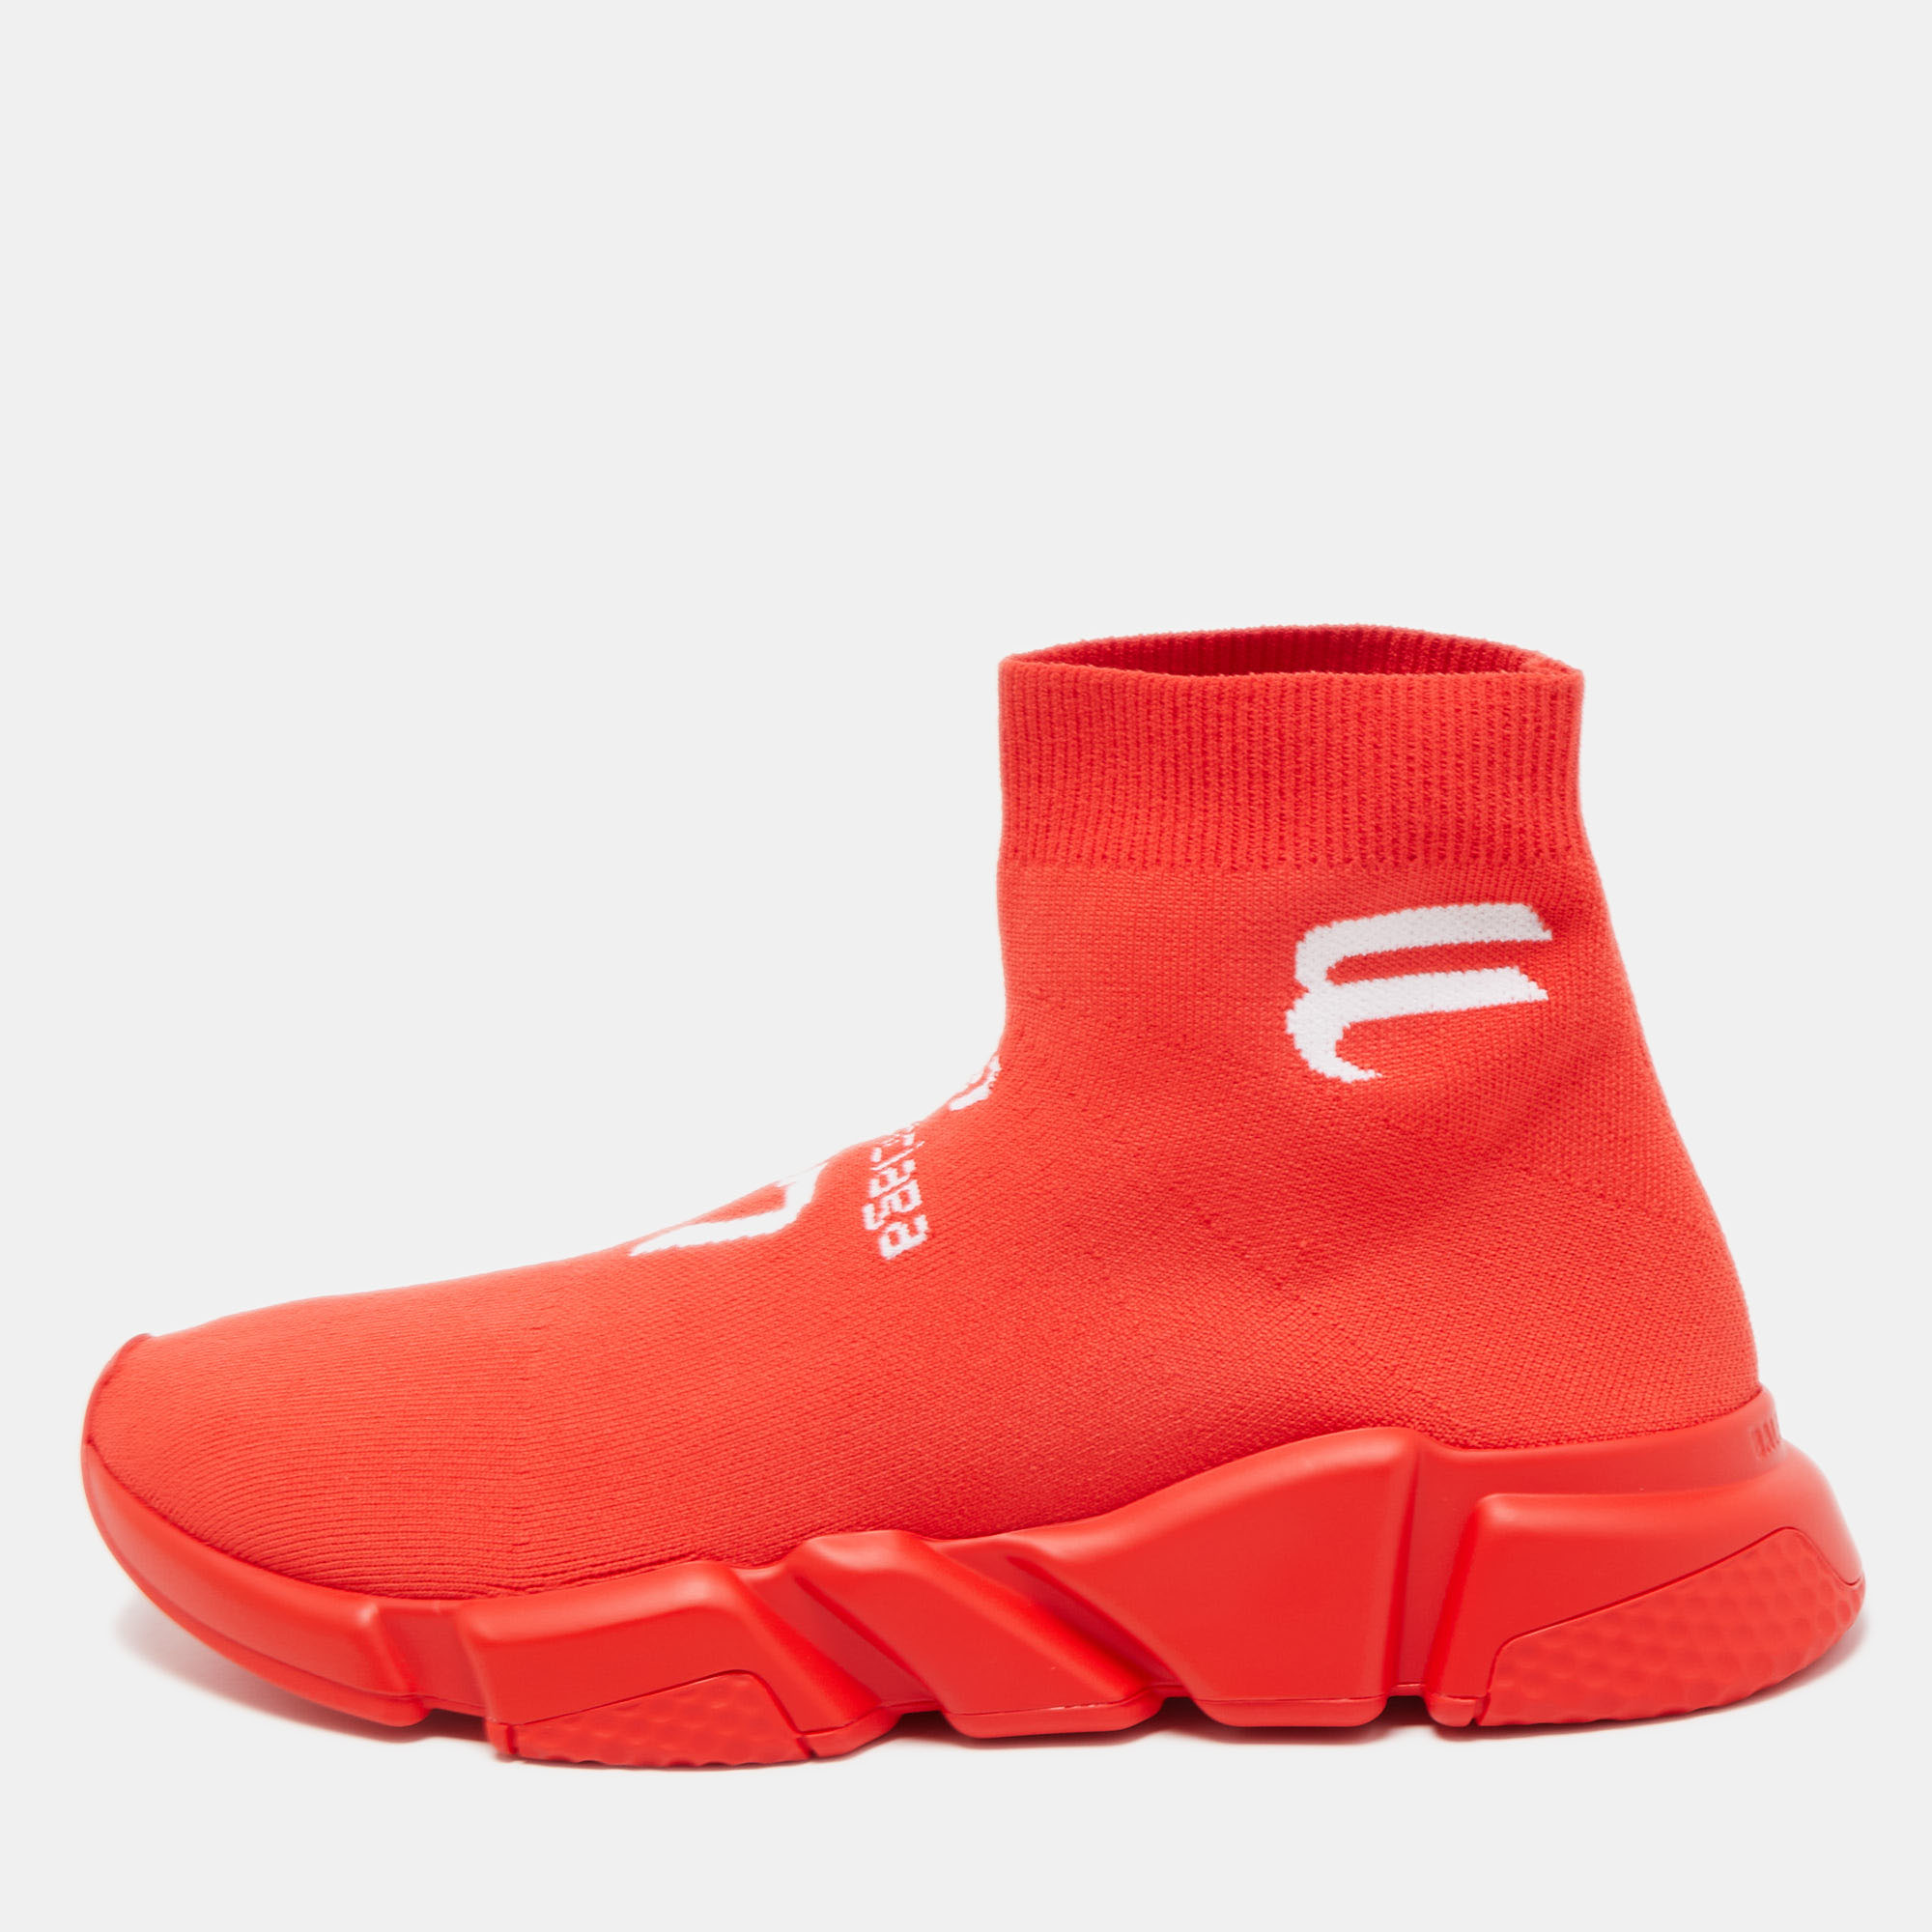 The Balenciaga Speed LT soccer sneakers are a stylish and sporty footwear choice. Crafted with precision these sneakers feature a vibrant red knit fabric upper that provides a snug and comfortable fit. The sleek design is complemented by a lightweight sole making them perfect for both athletic activities and fashion forward streetwear.